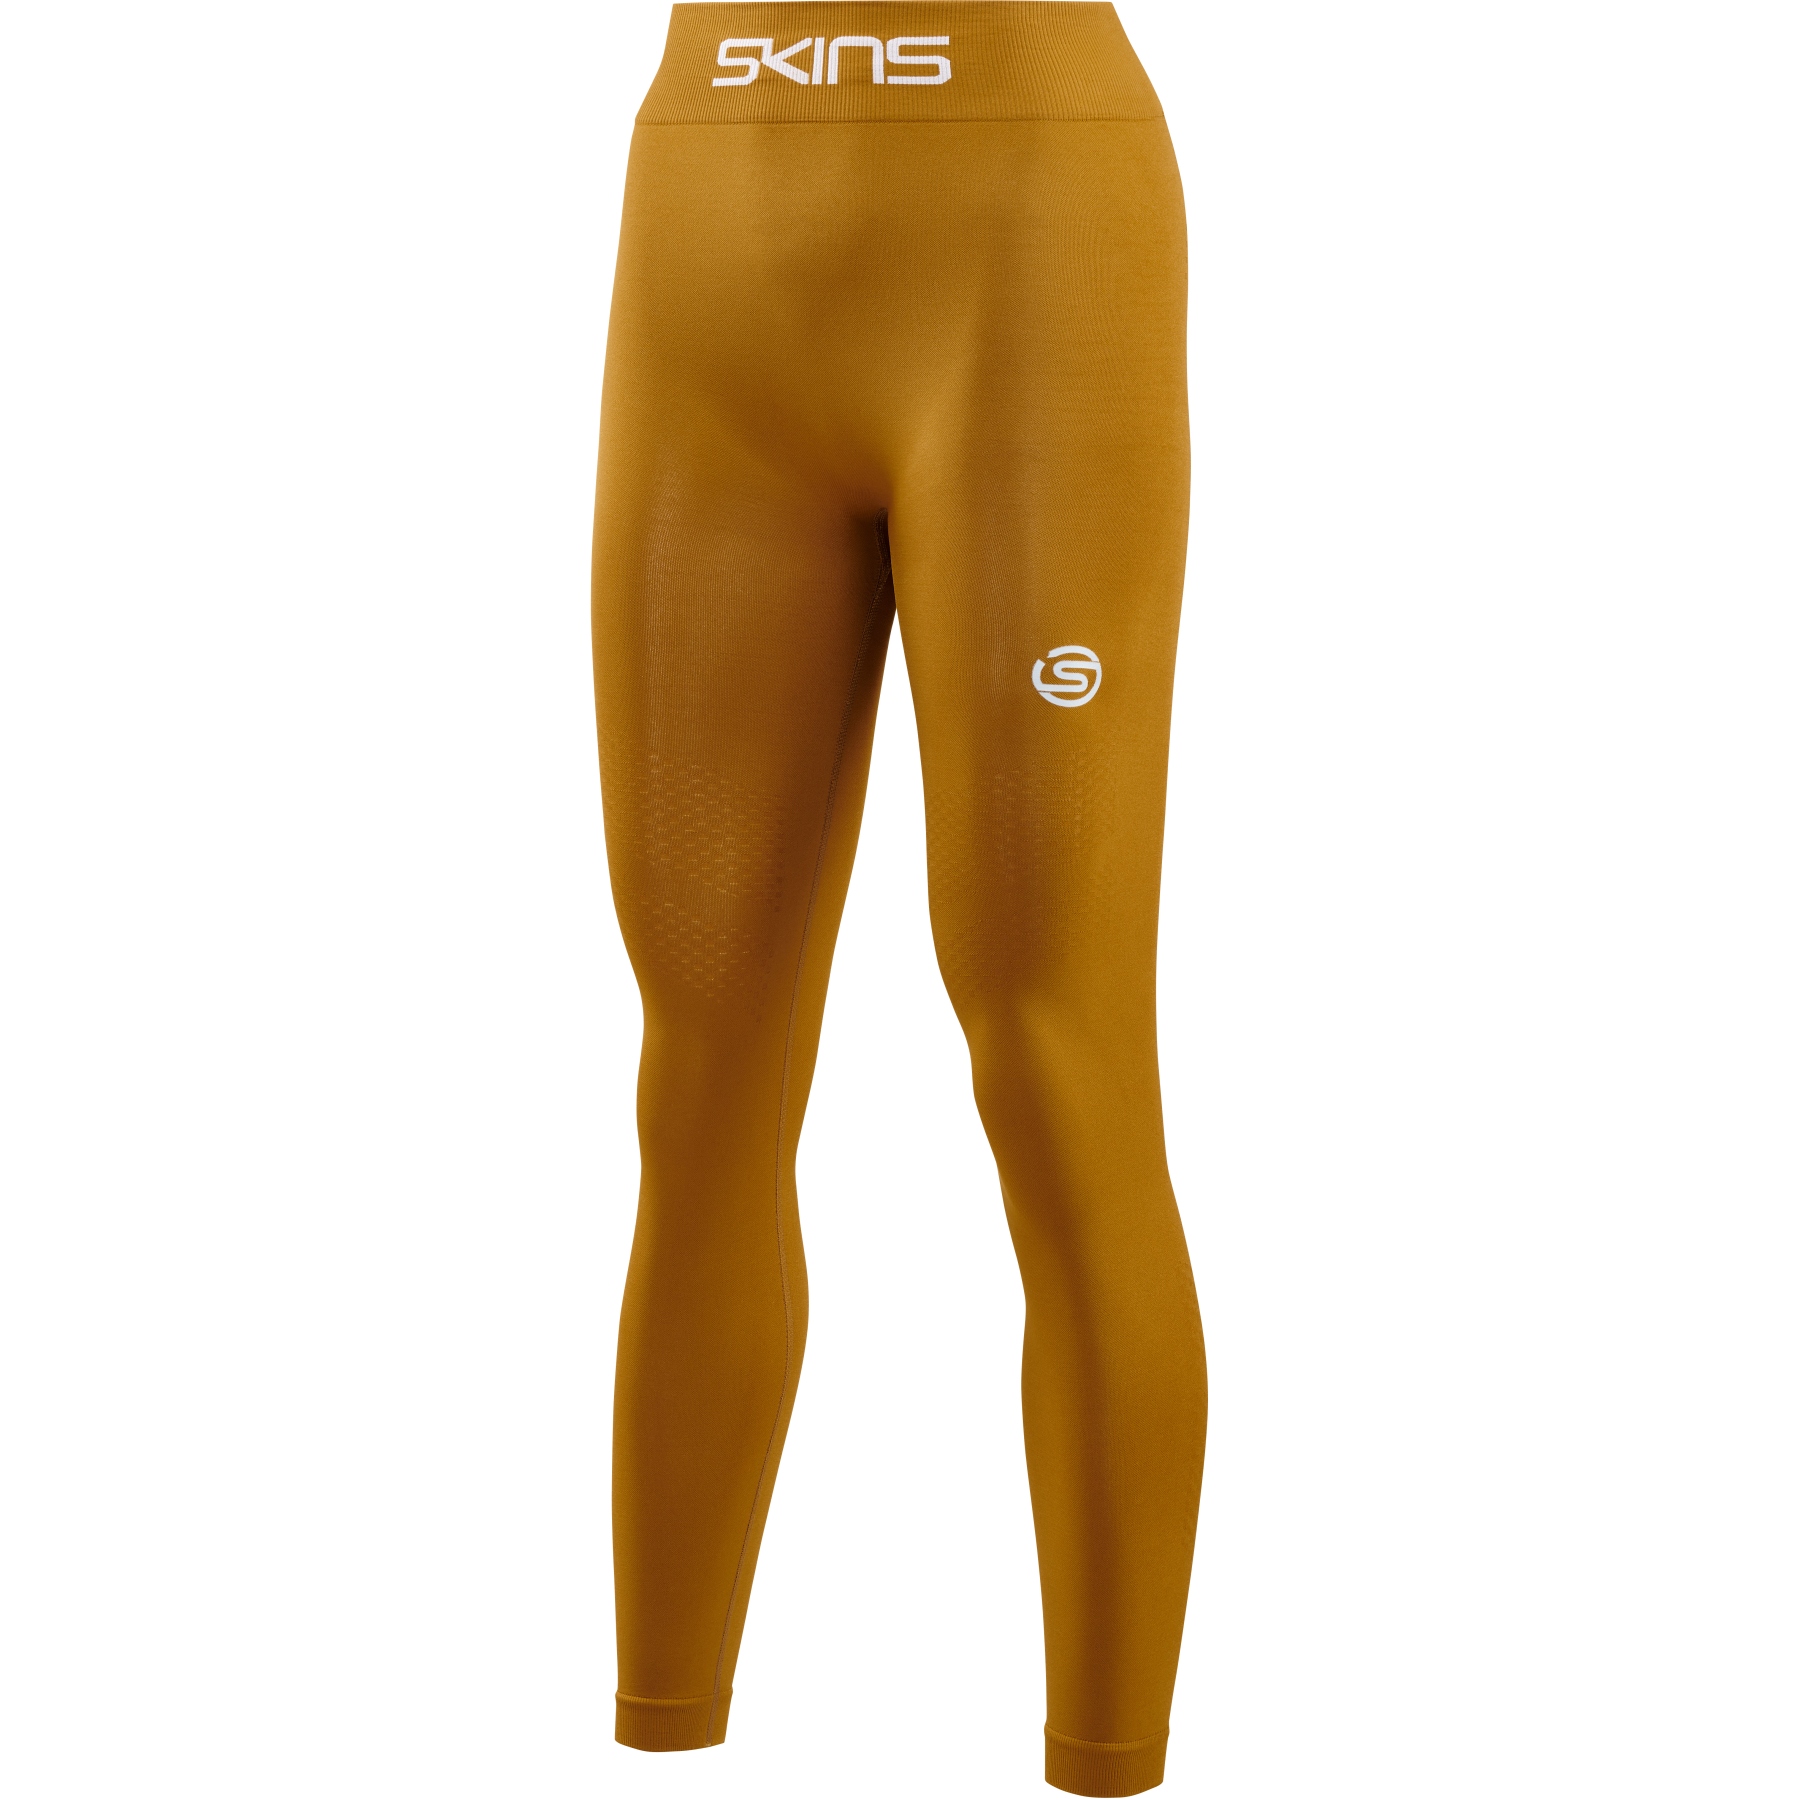 SKINS Compression Women's 3-Series Seamless Long Tights - Bronze